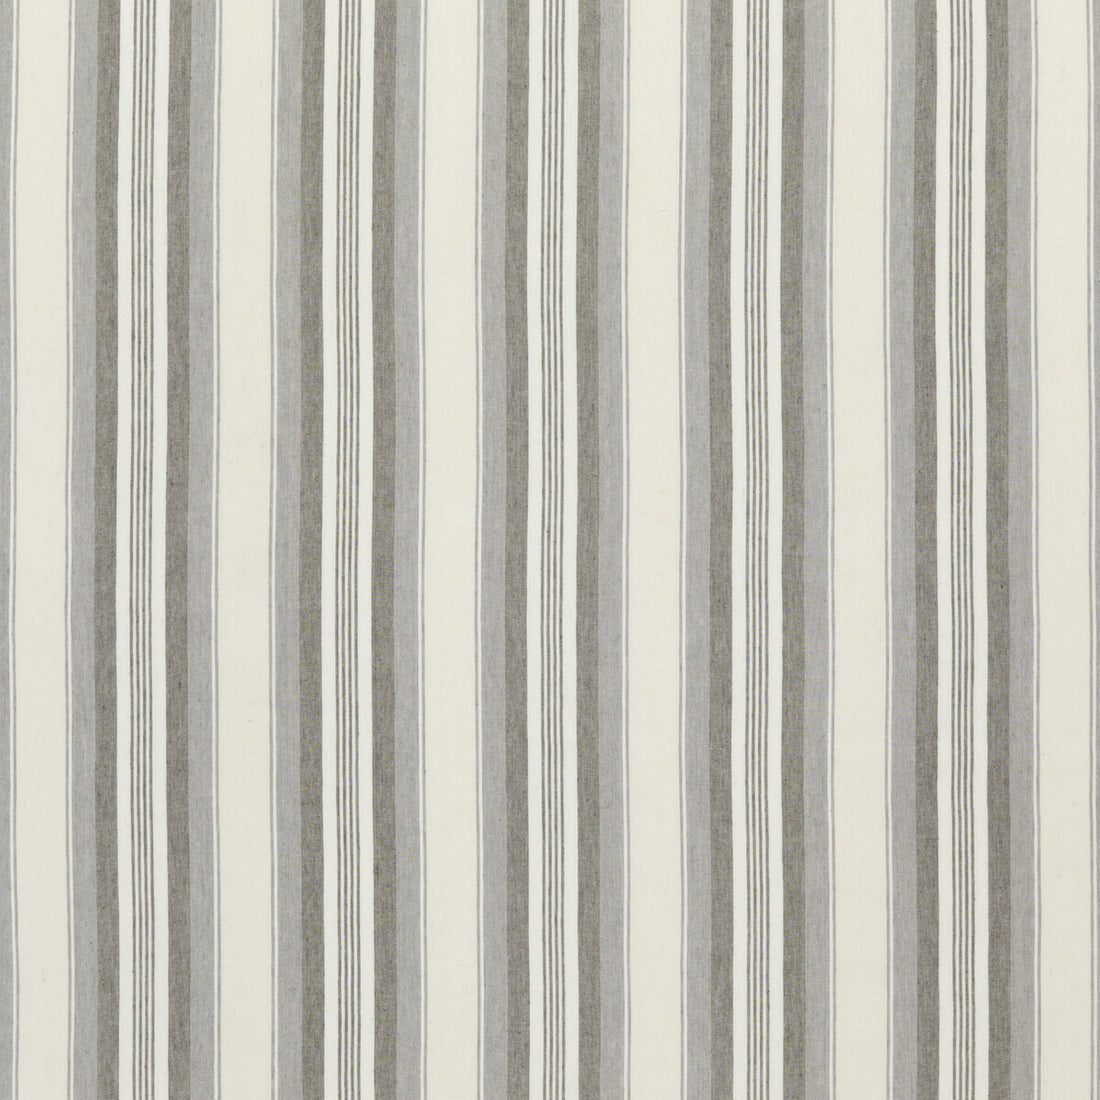 Lovisa fabric in soft grey color - pattern ED85301.926.0 - by Threads in the Great Stripes collection